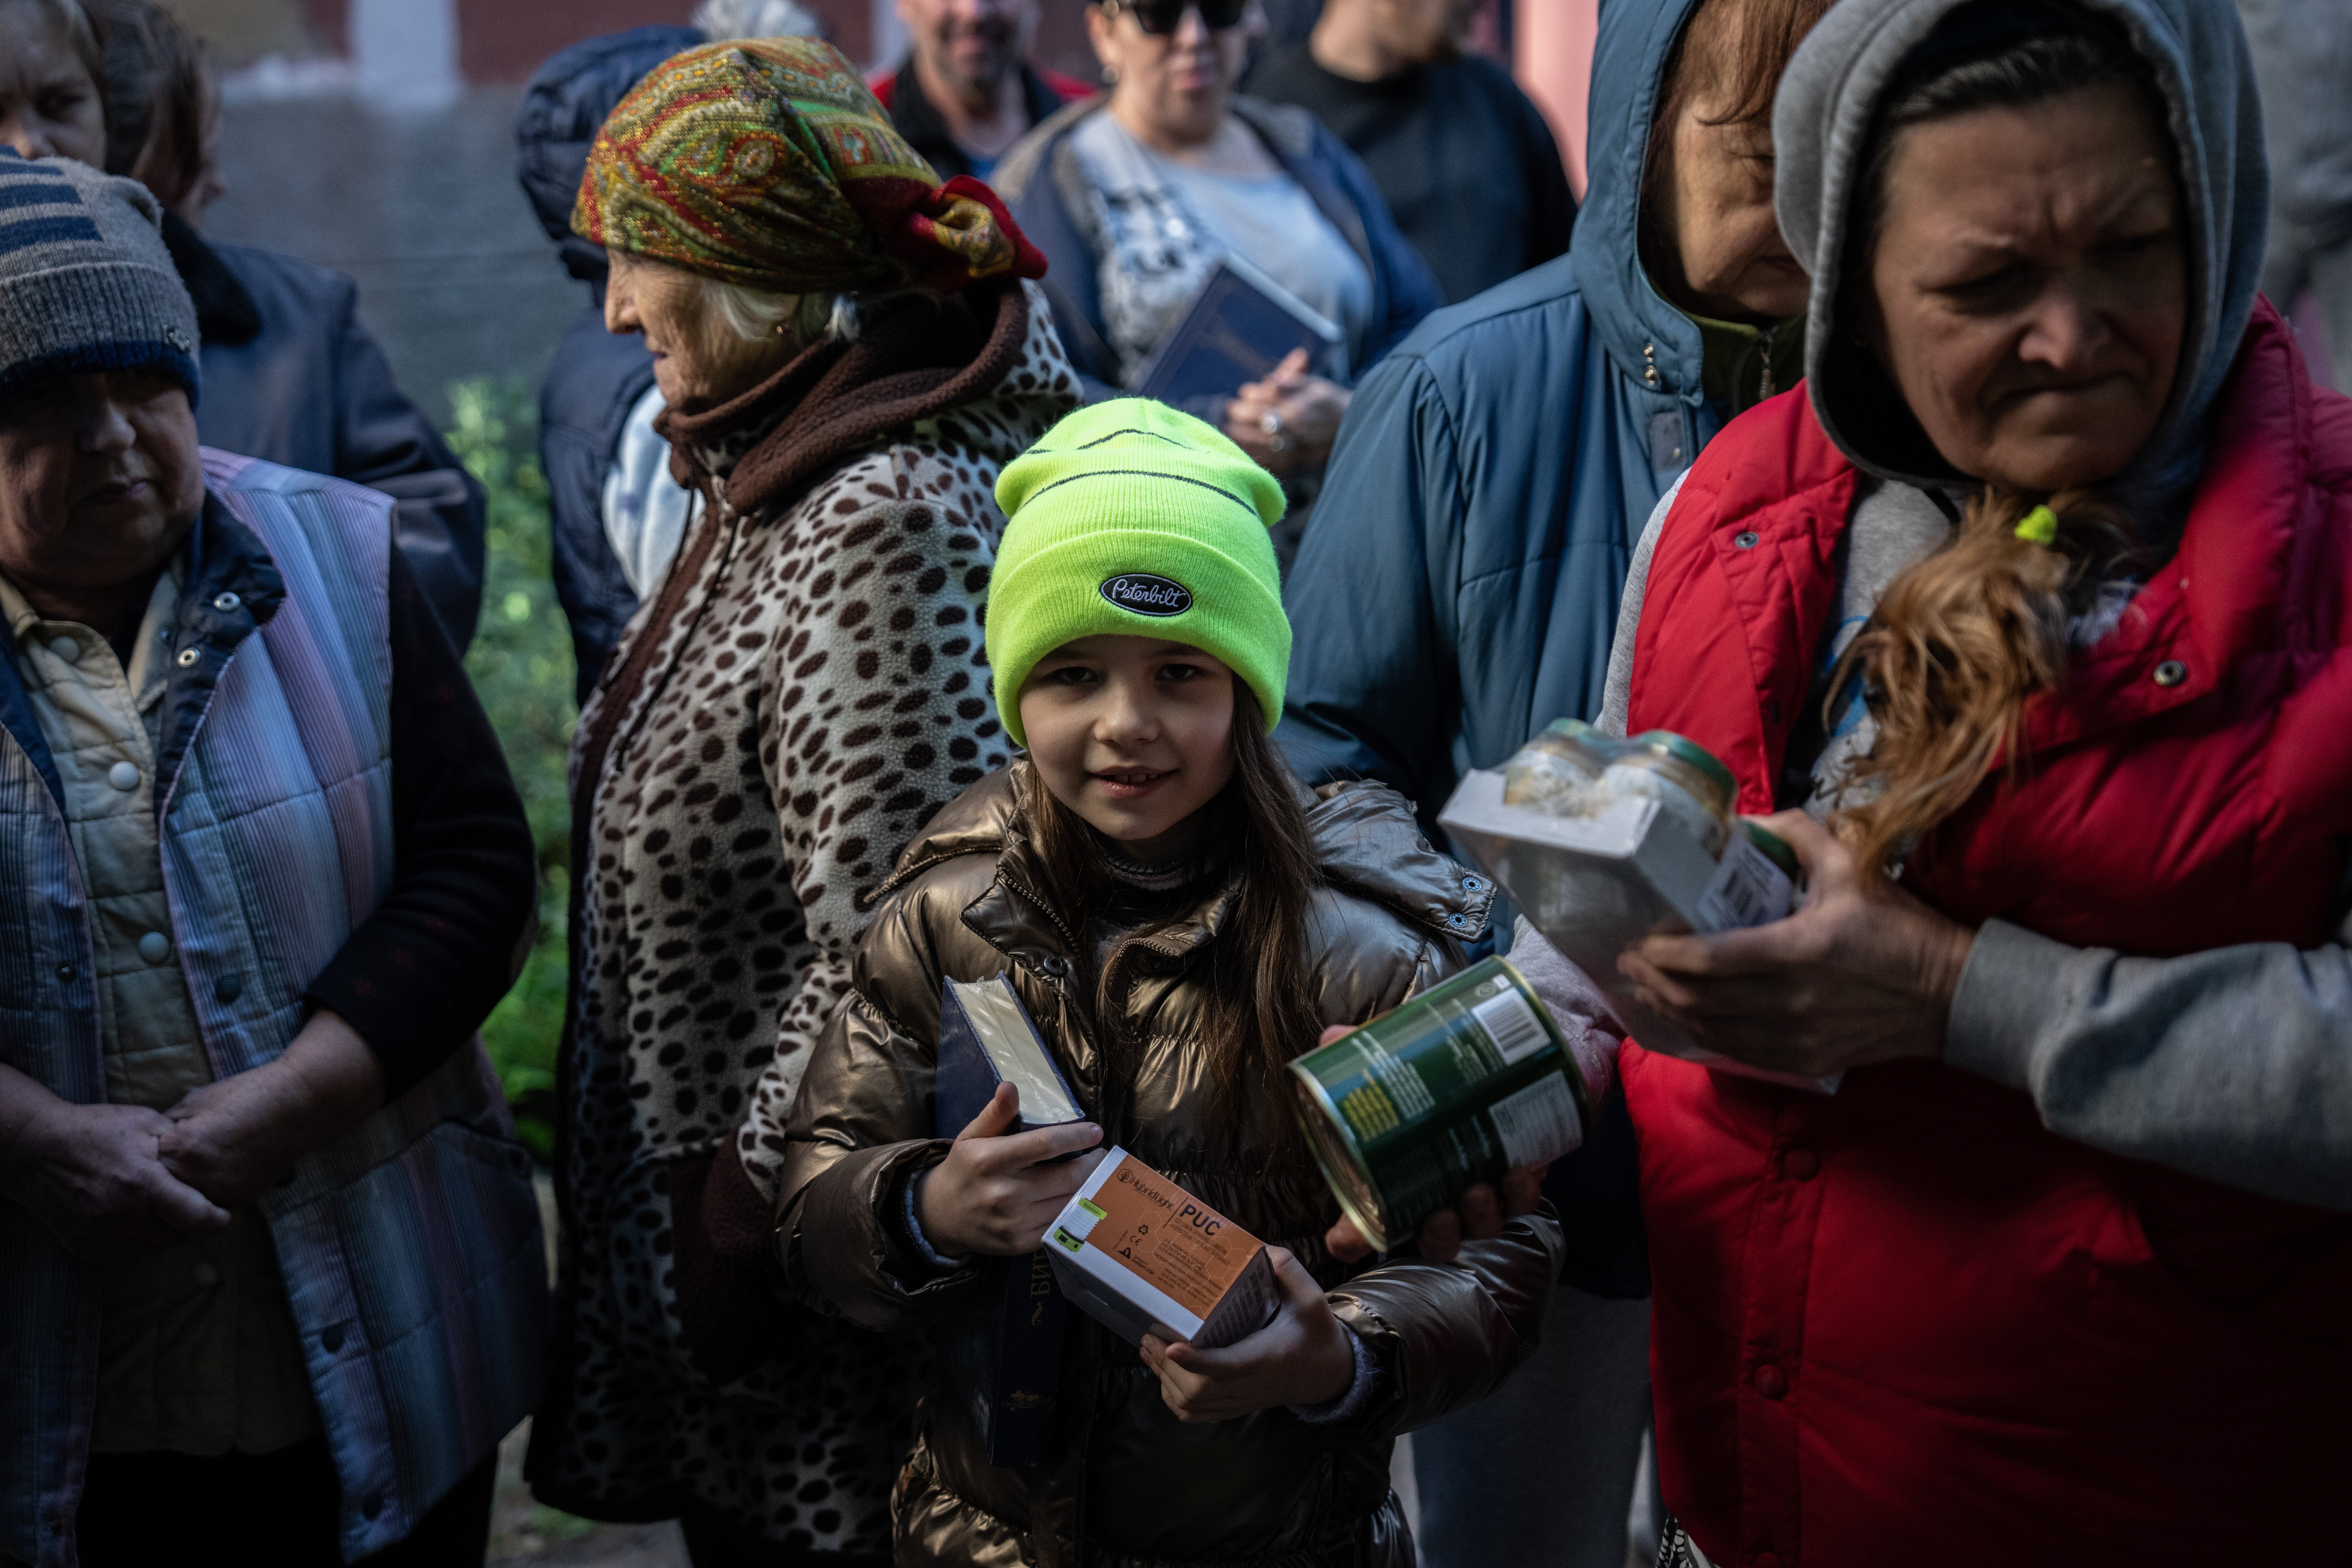 A young girl is among residents getting food aid in Bakhmut – a risky process with Russian drones overhead and shells bombarding the city